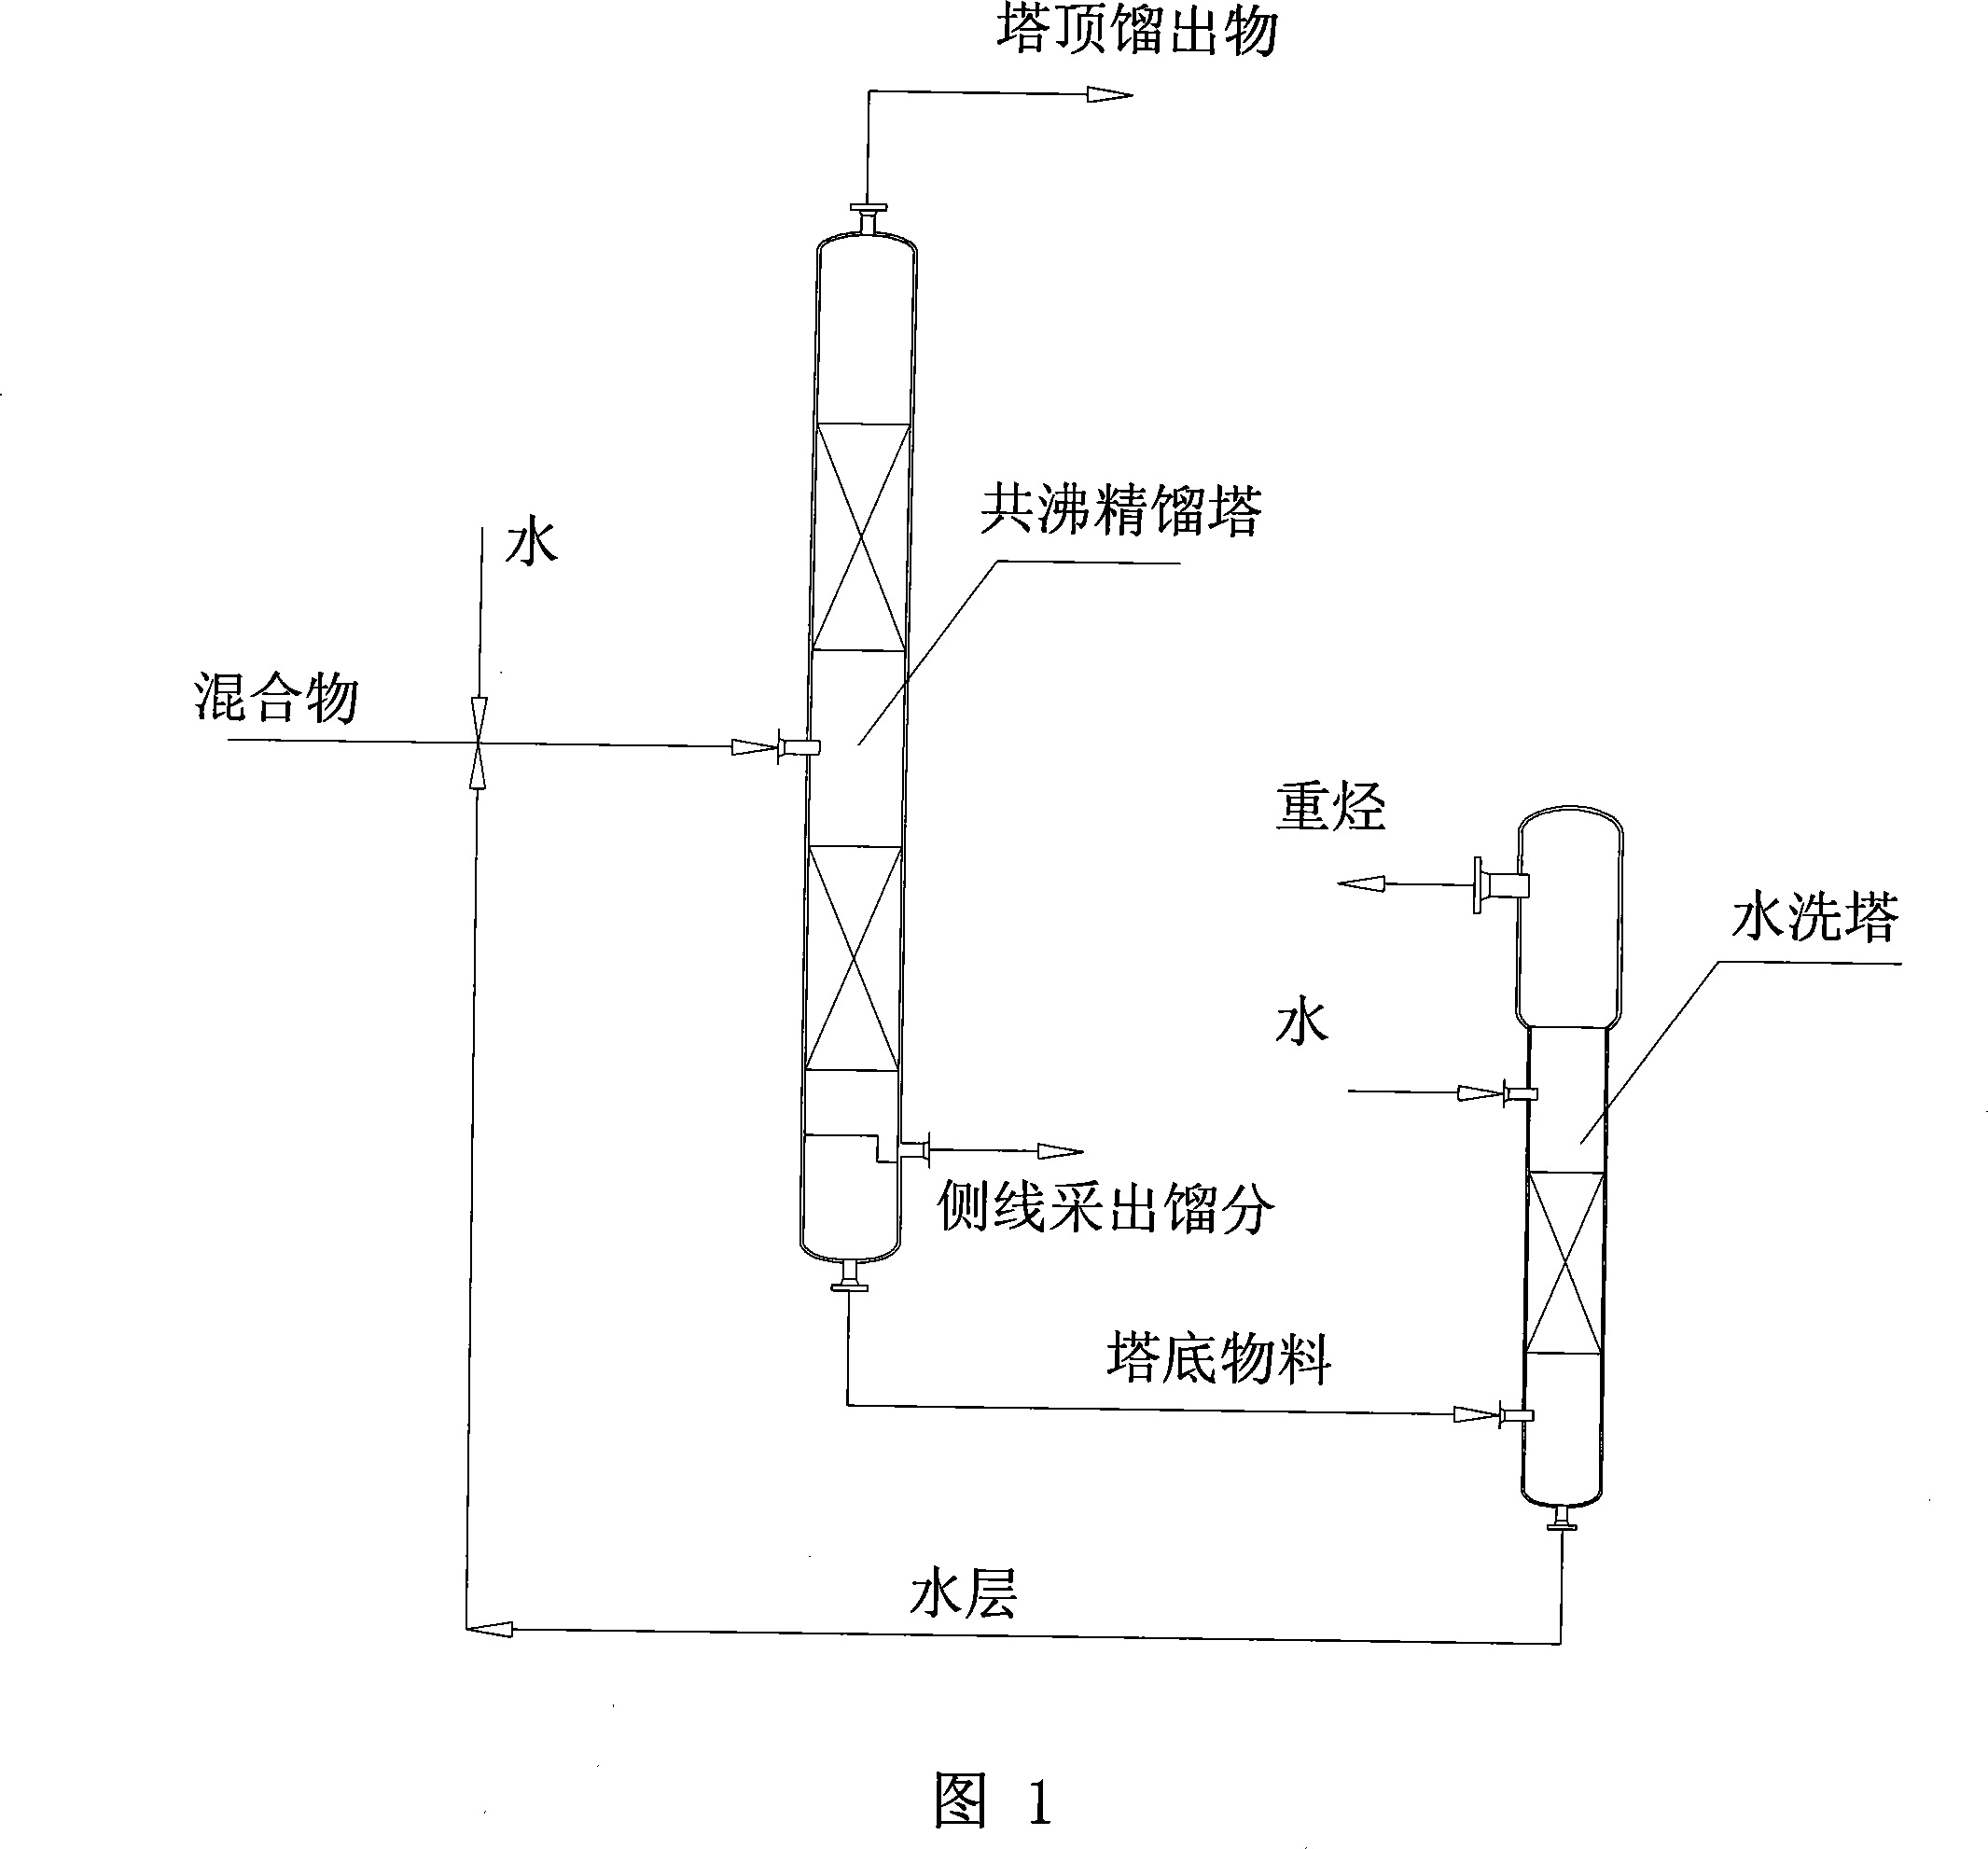 Method for separating sec-butyl acetate, acetic acid and heavy hydrocarbon